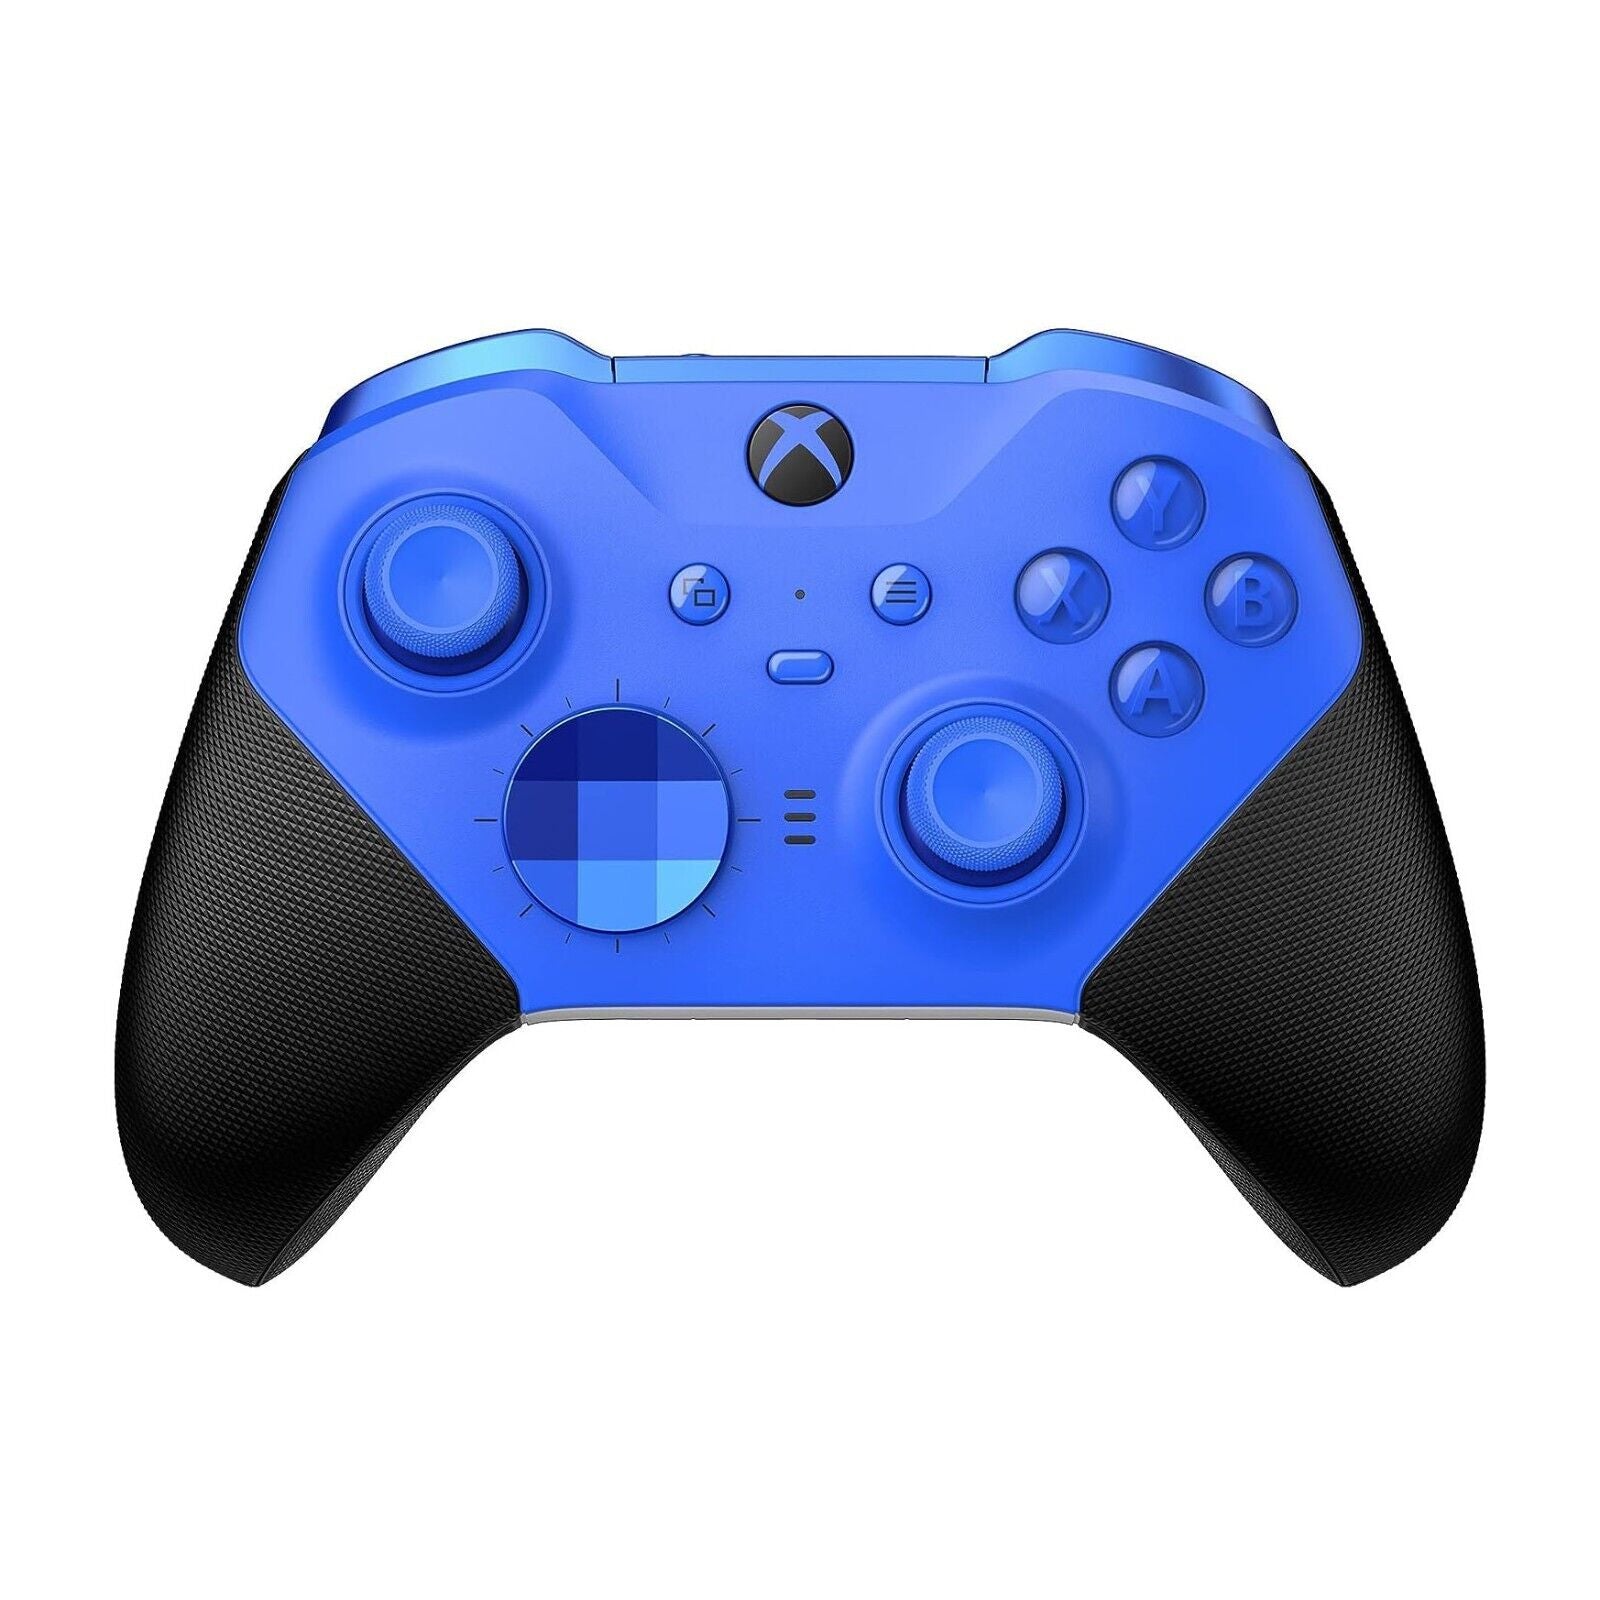 Microsoft Elite Series 2 Wireless Controller for Xbox Series S/X/One - Blue